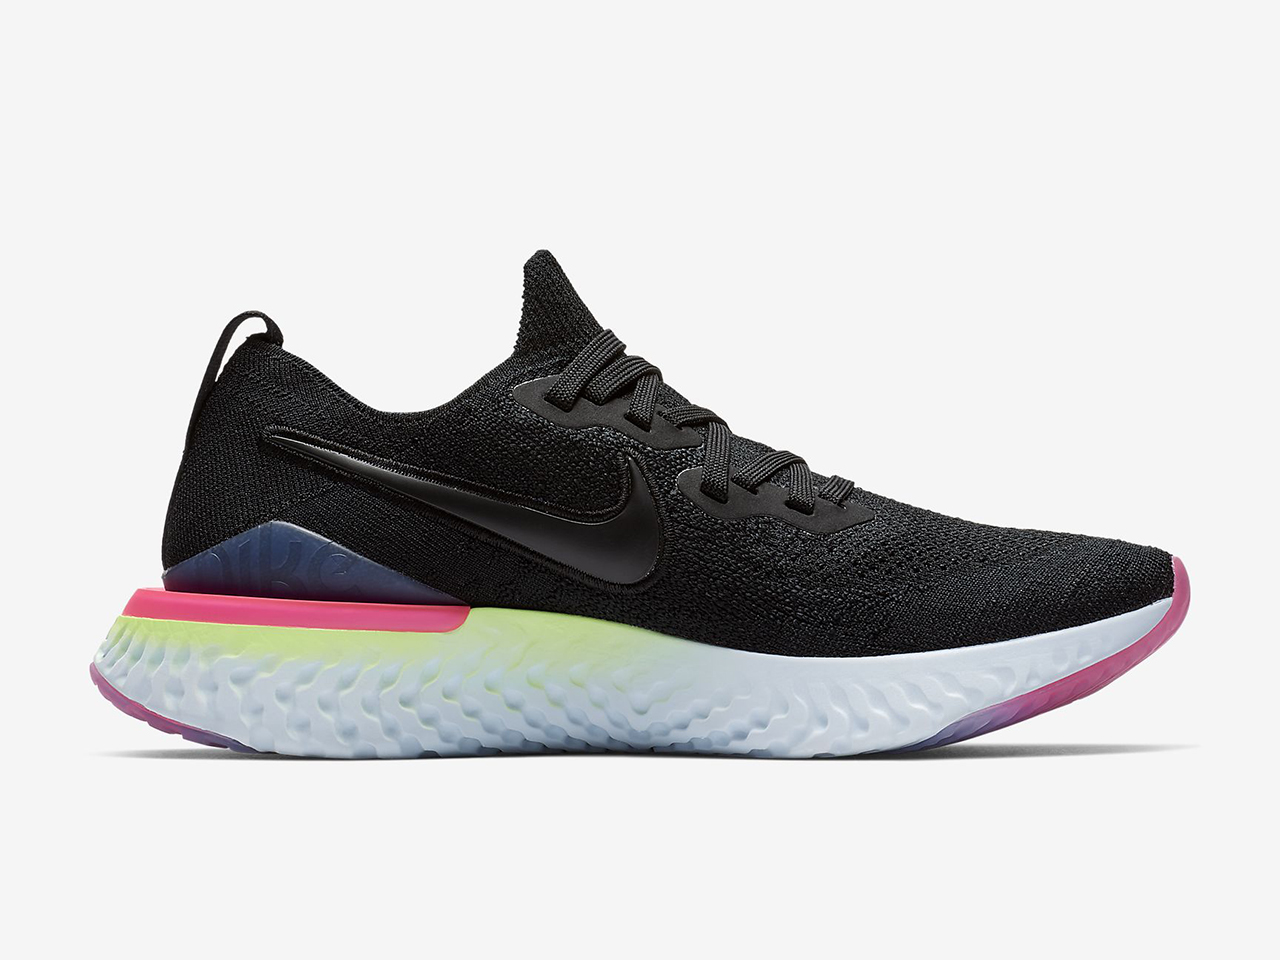 Great running shoes: Nike Epic React Flyknit 2 right shoe in black with rainbow sole